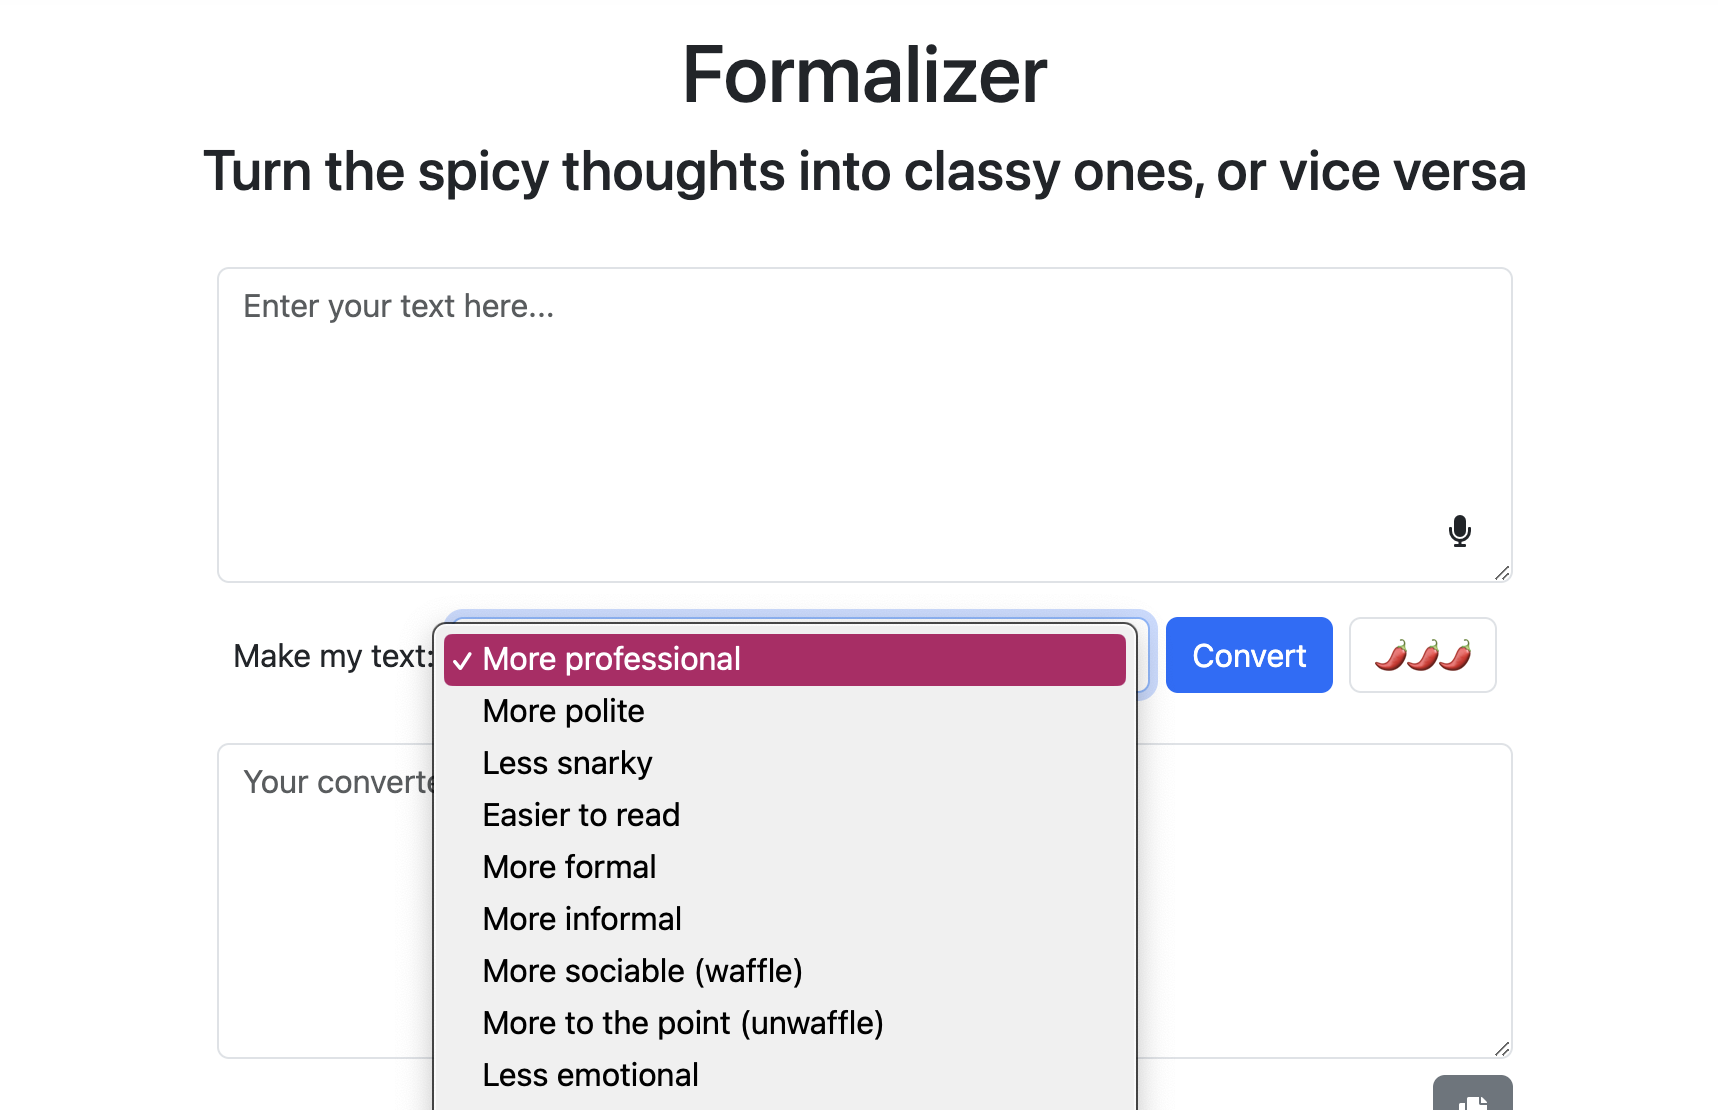 Formalizer, Turn the spicy thoughts into classy ones, or vice versa